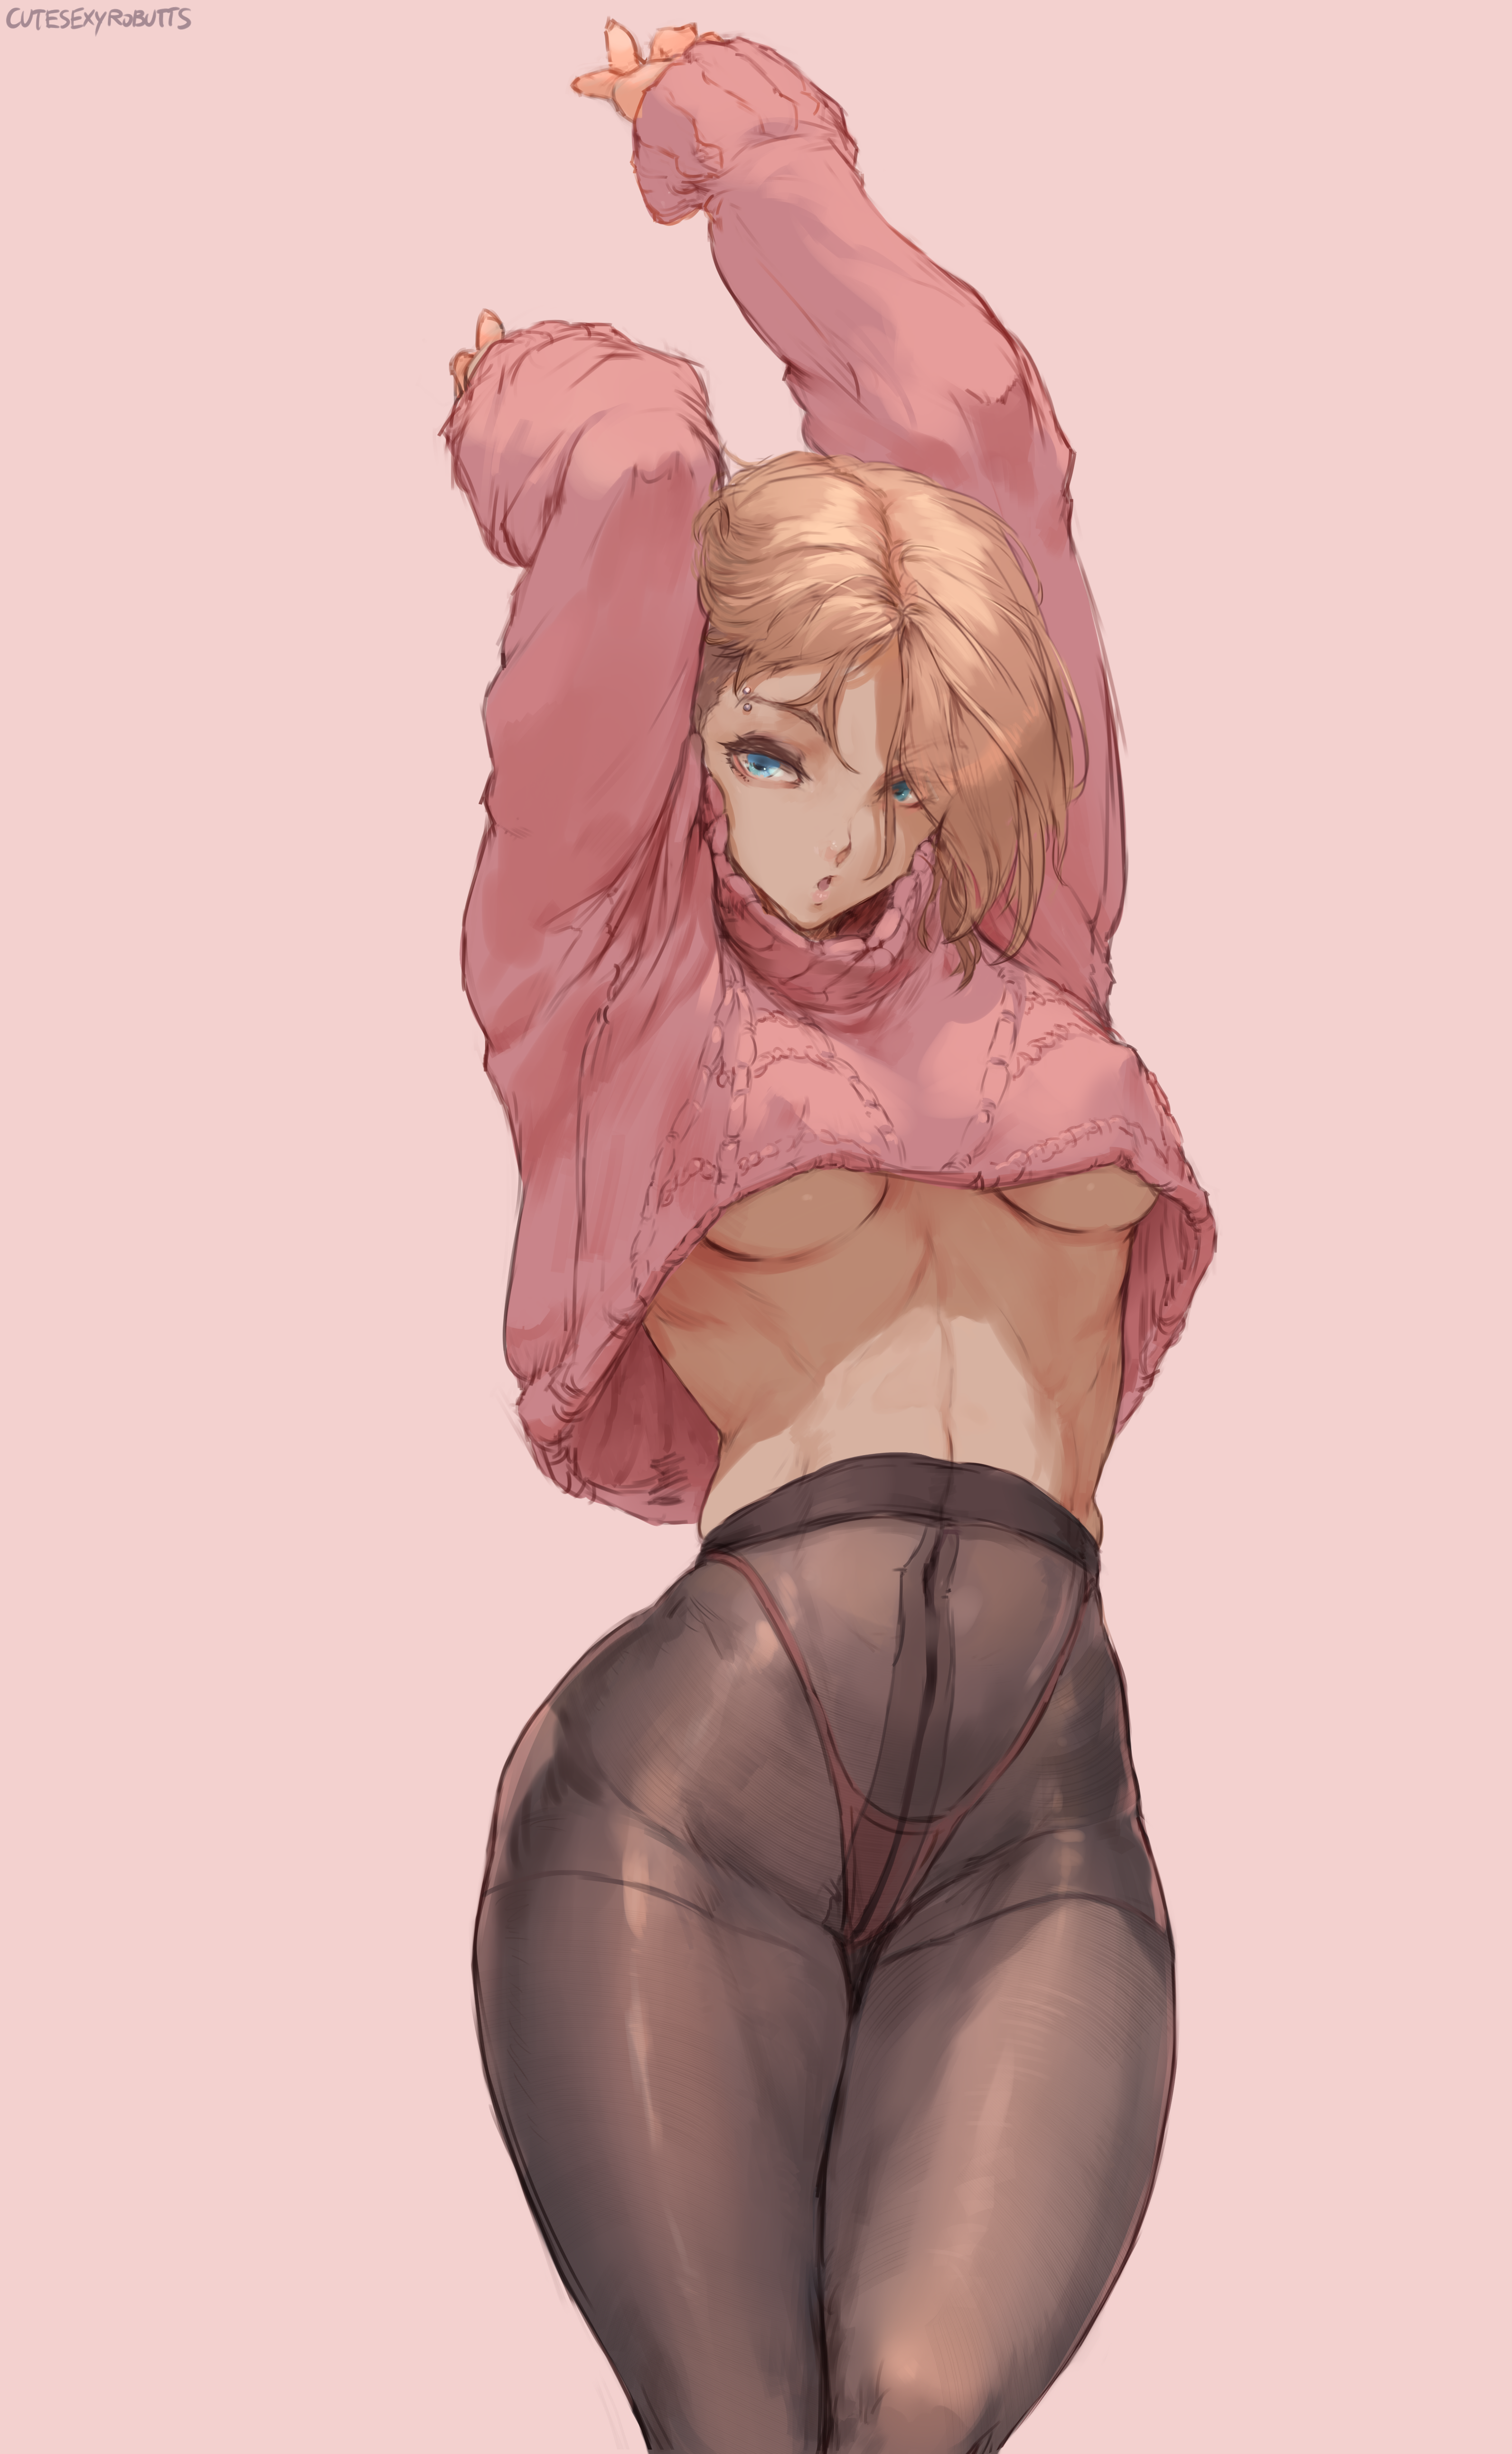 Anime 3185x5169 Gwen Stacy Spider-Man blonde side shave piercing pierced eyebrow blue eyes parted lips sweater pink sweater no bra underboob belly underwear G-strings pantyhose see-through clothing thick thigh arms up pink pink background simple background looking at viewer 2D artwork portrait display drawing digital art illustration fan art Cutesexyrobutts short hair